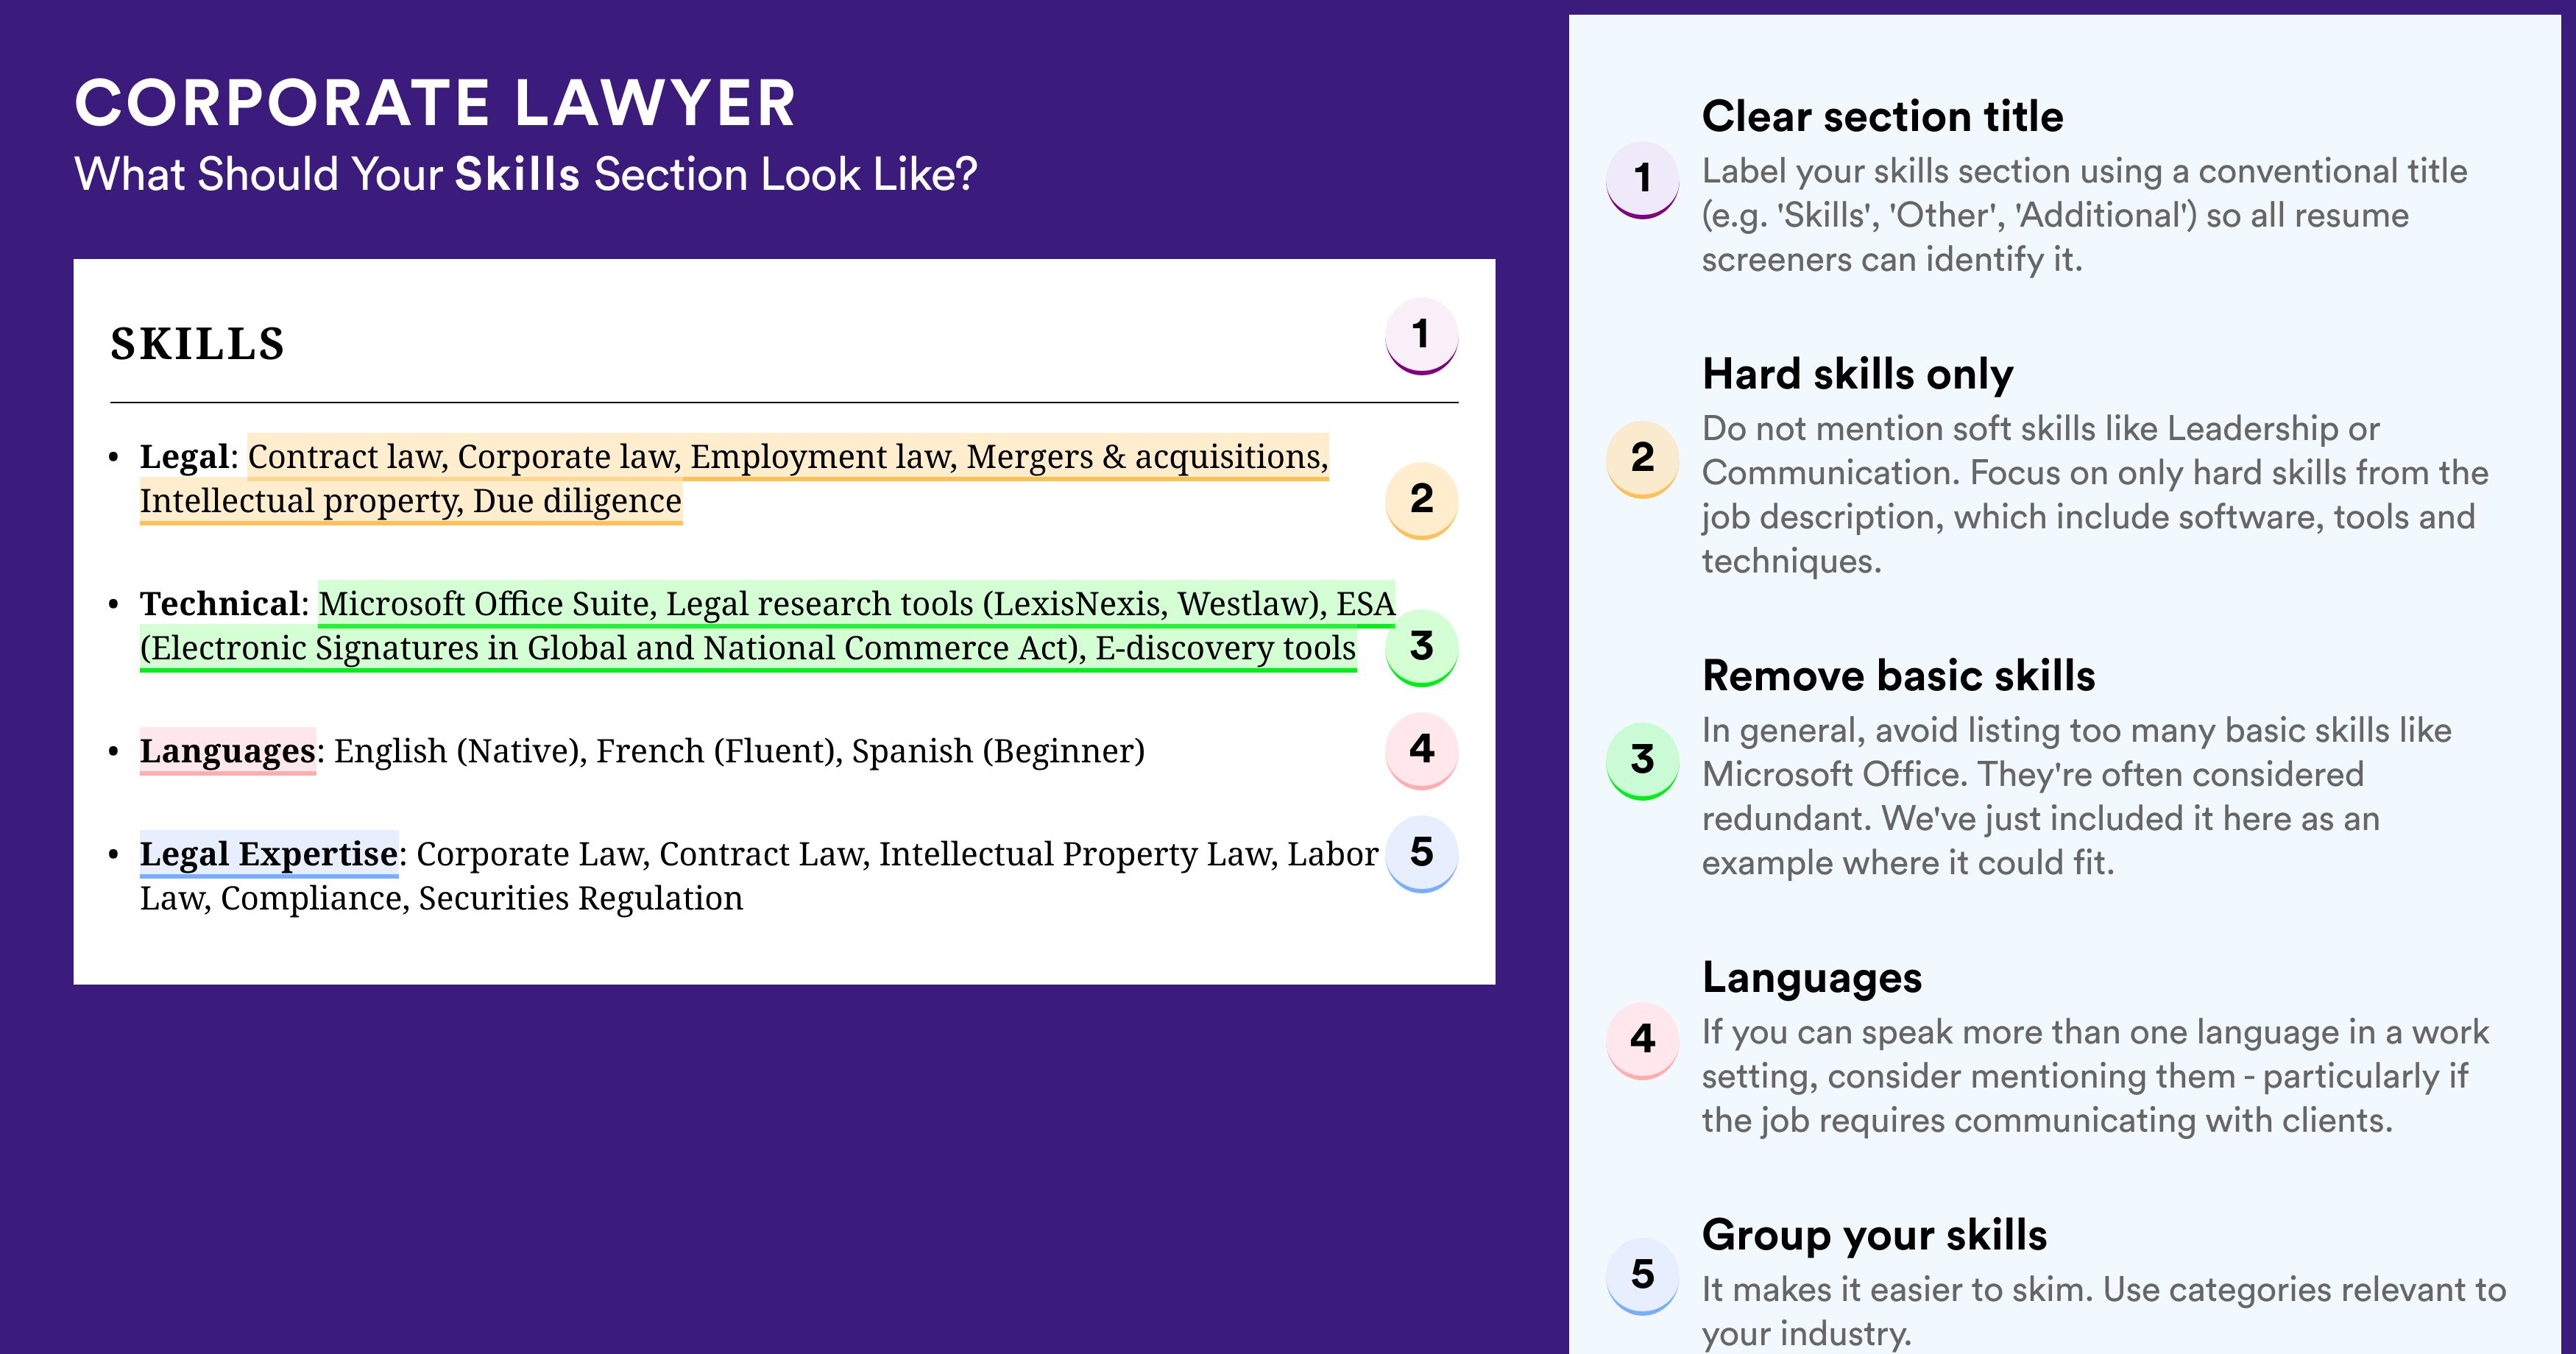 How To Write Your Skills Section - Corporate Lawyer Roles